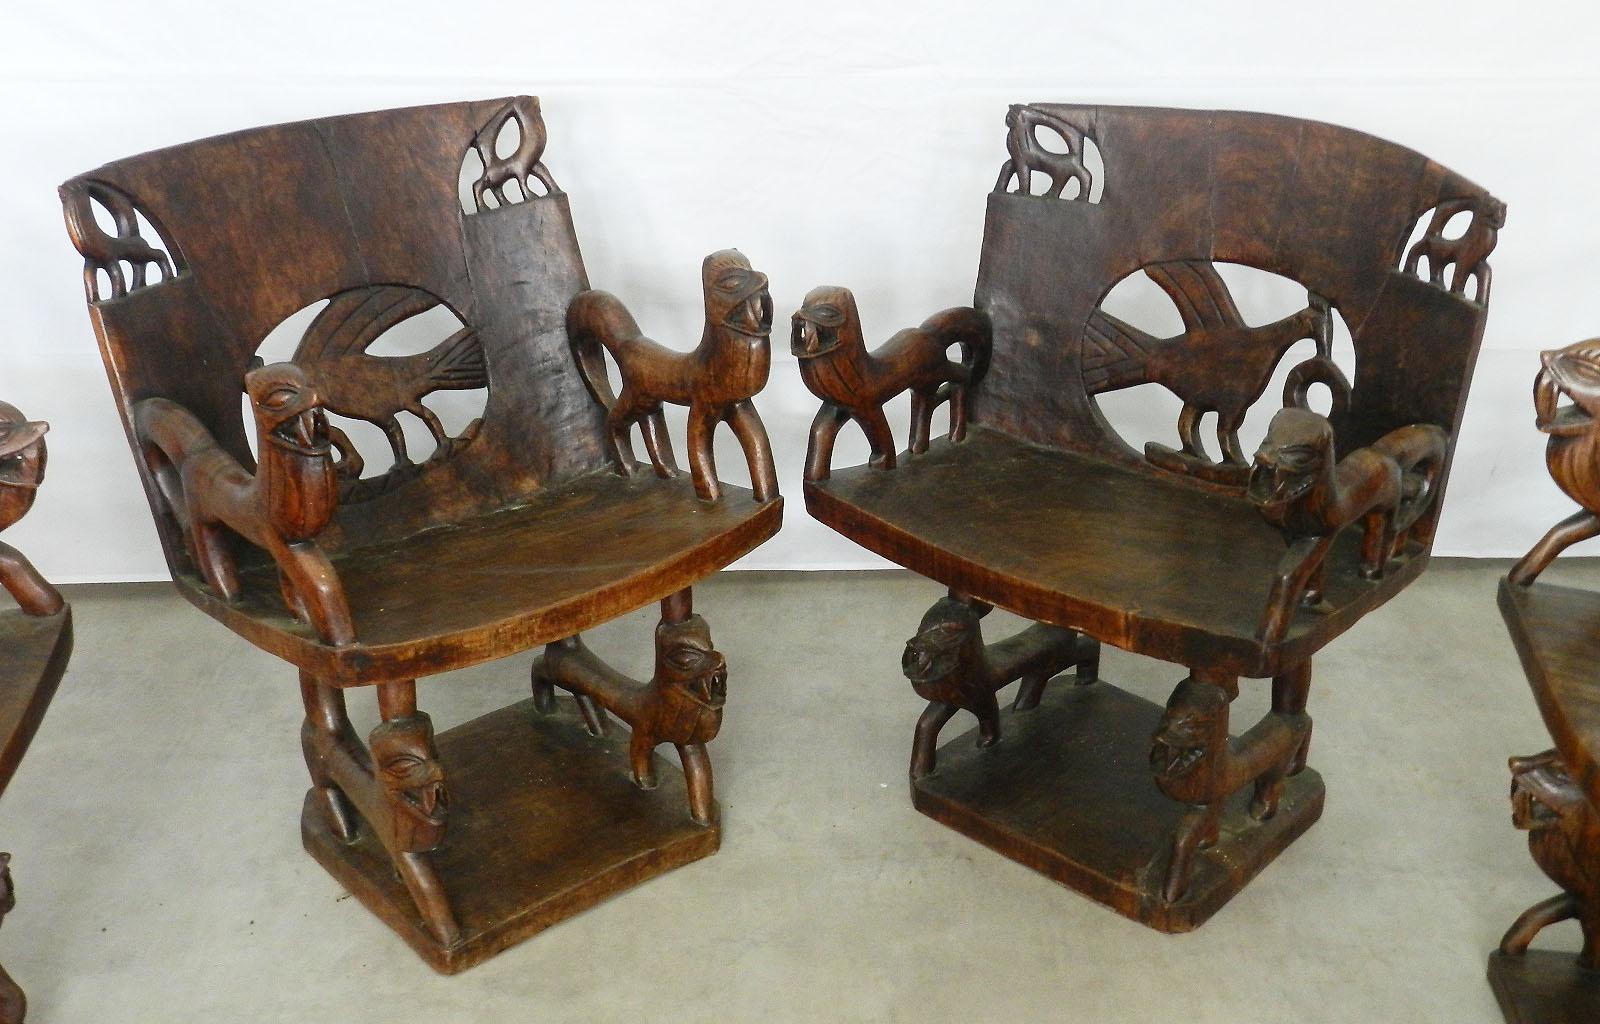 Two Pairs of African Chairs Carved Animals Wood Armchairs Early 20th Century 2